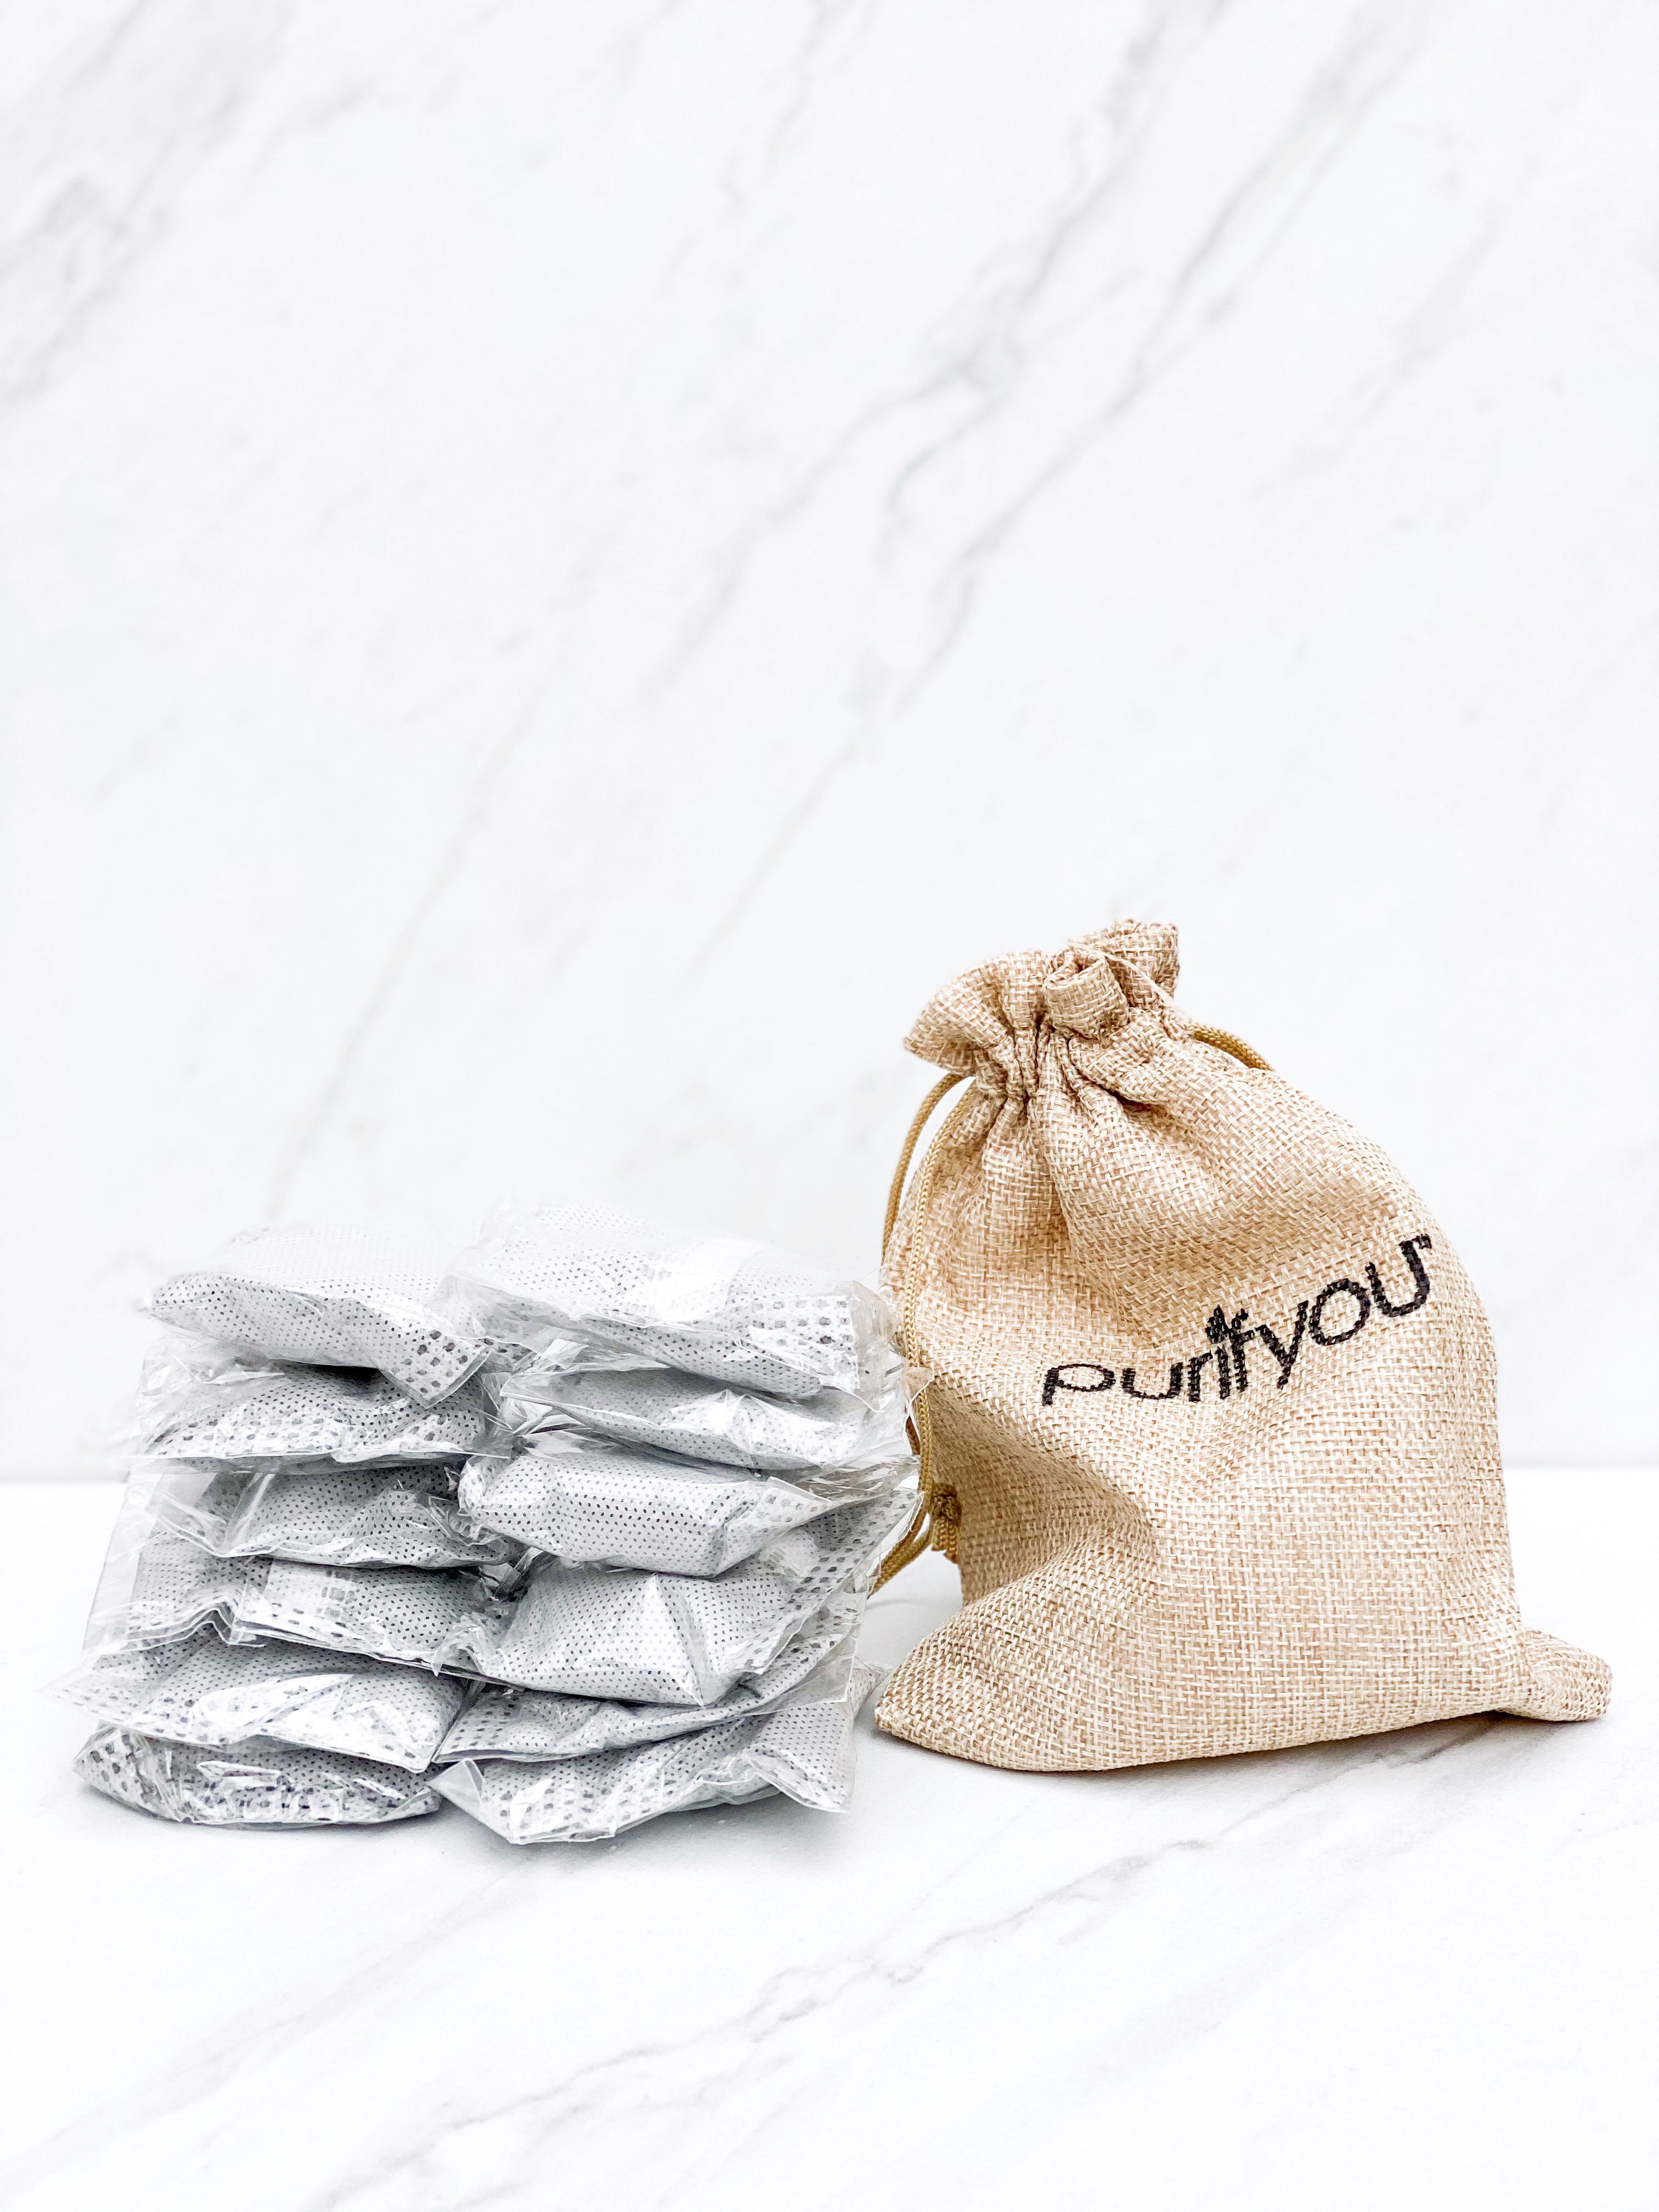 What are bamboo charcoal air purifying bags, and how do they work? - Quora